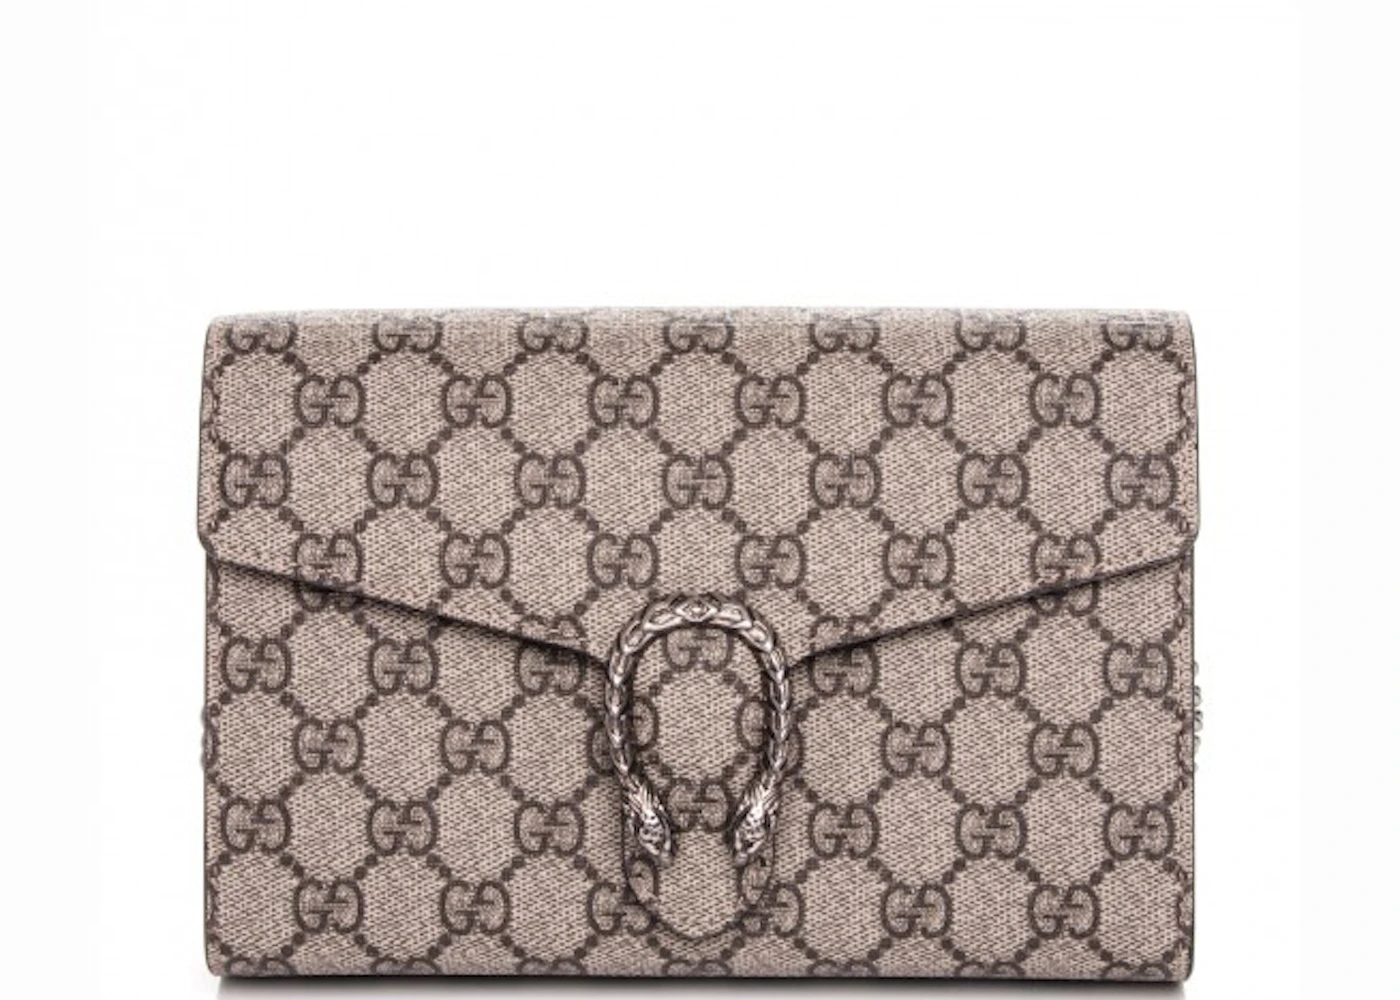 Gucci Dionysus Chain Wallet GG Supreme Beige/Red in Coated Canvas